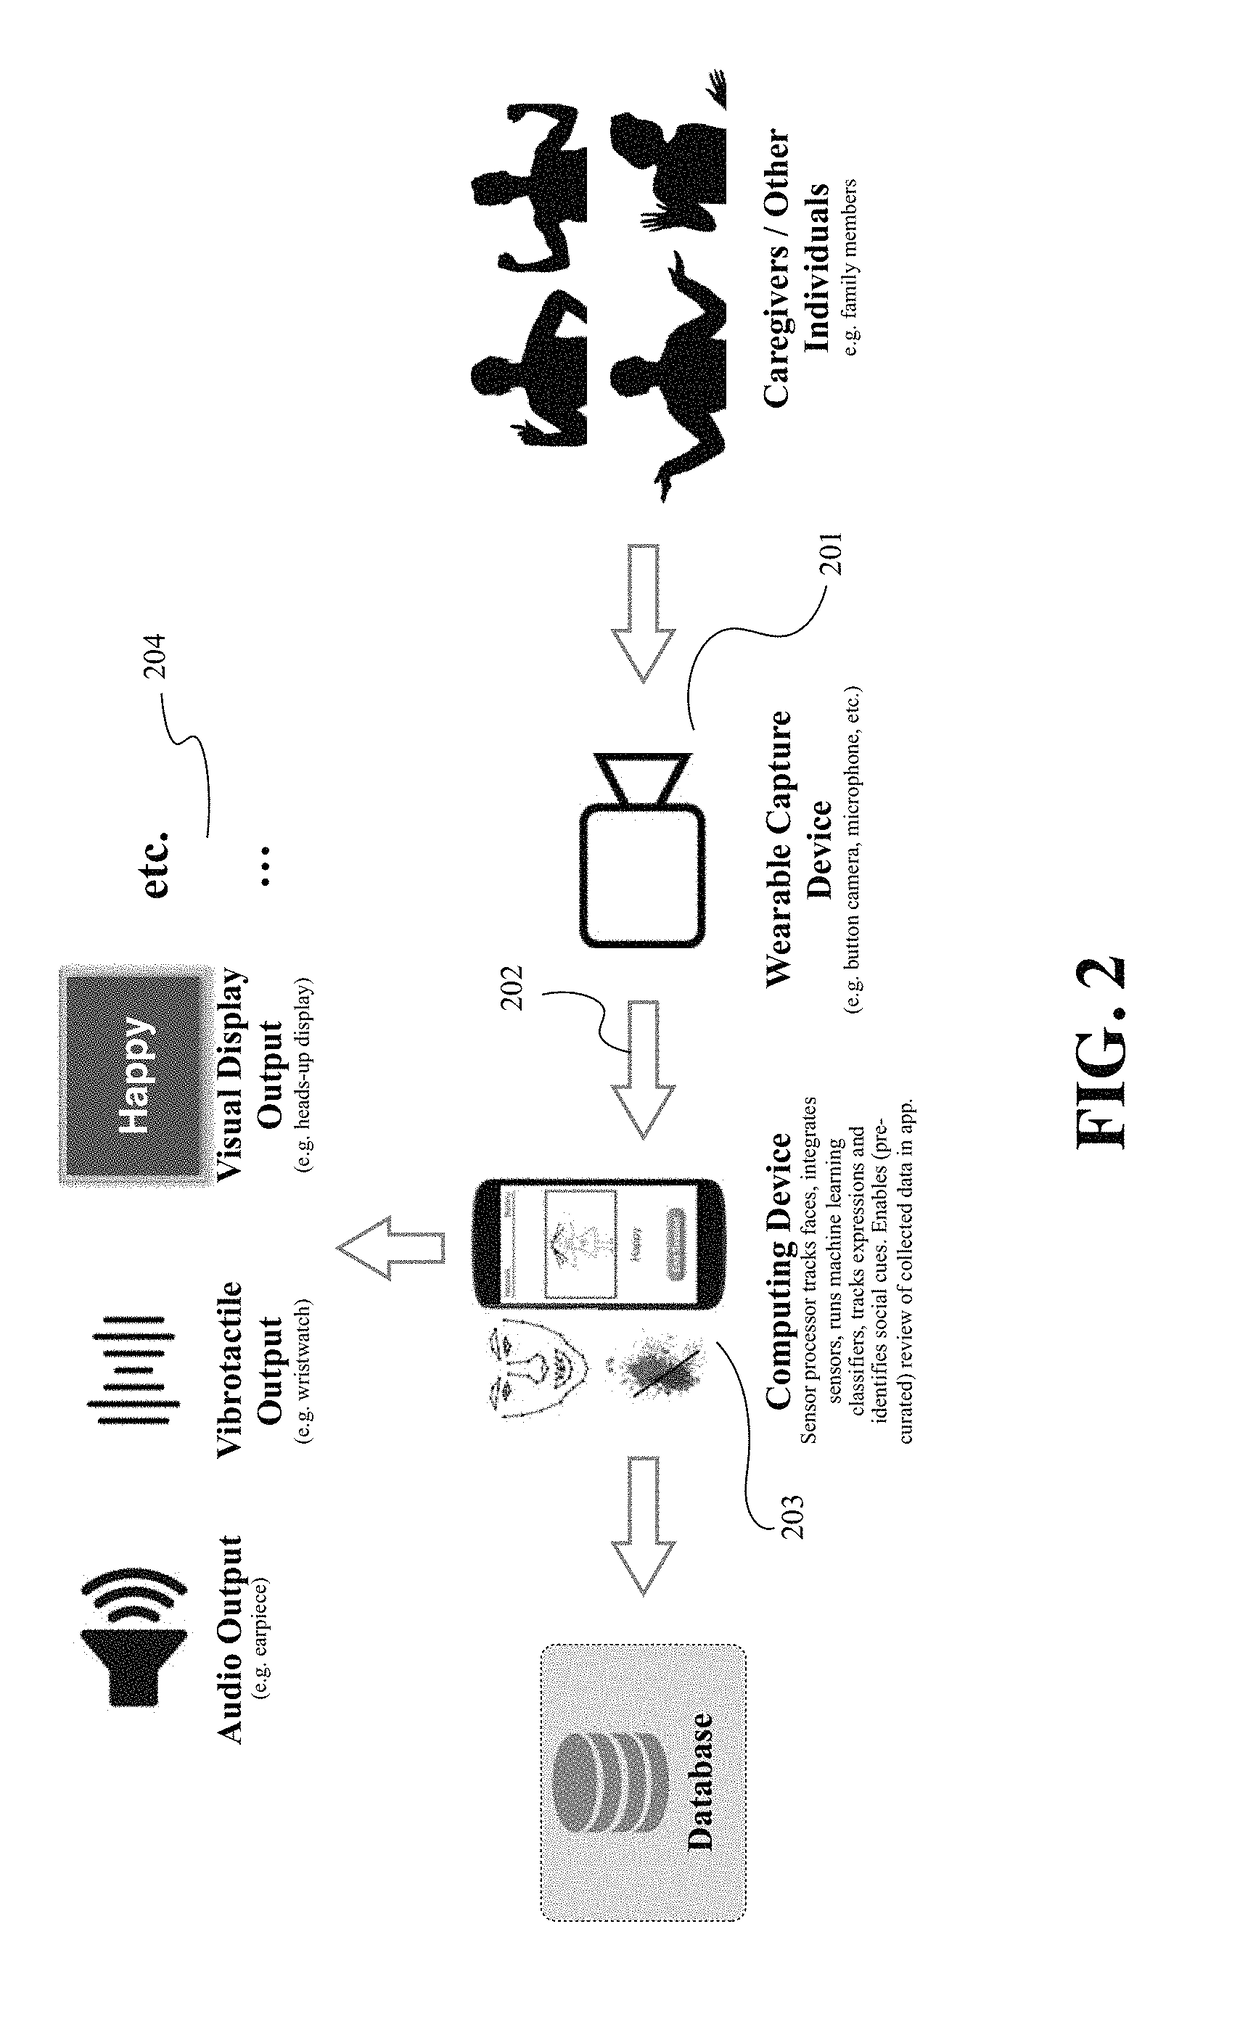 Systems and Methods for Using Mobile and Wearable Video Capture and Feedback Plat-Forms for Therapy of Mental Disorders